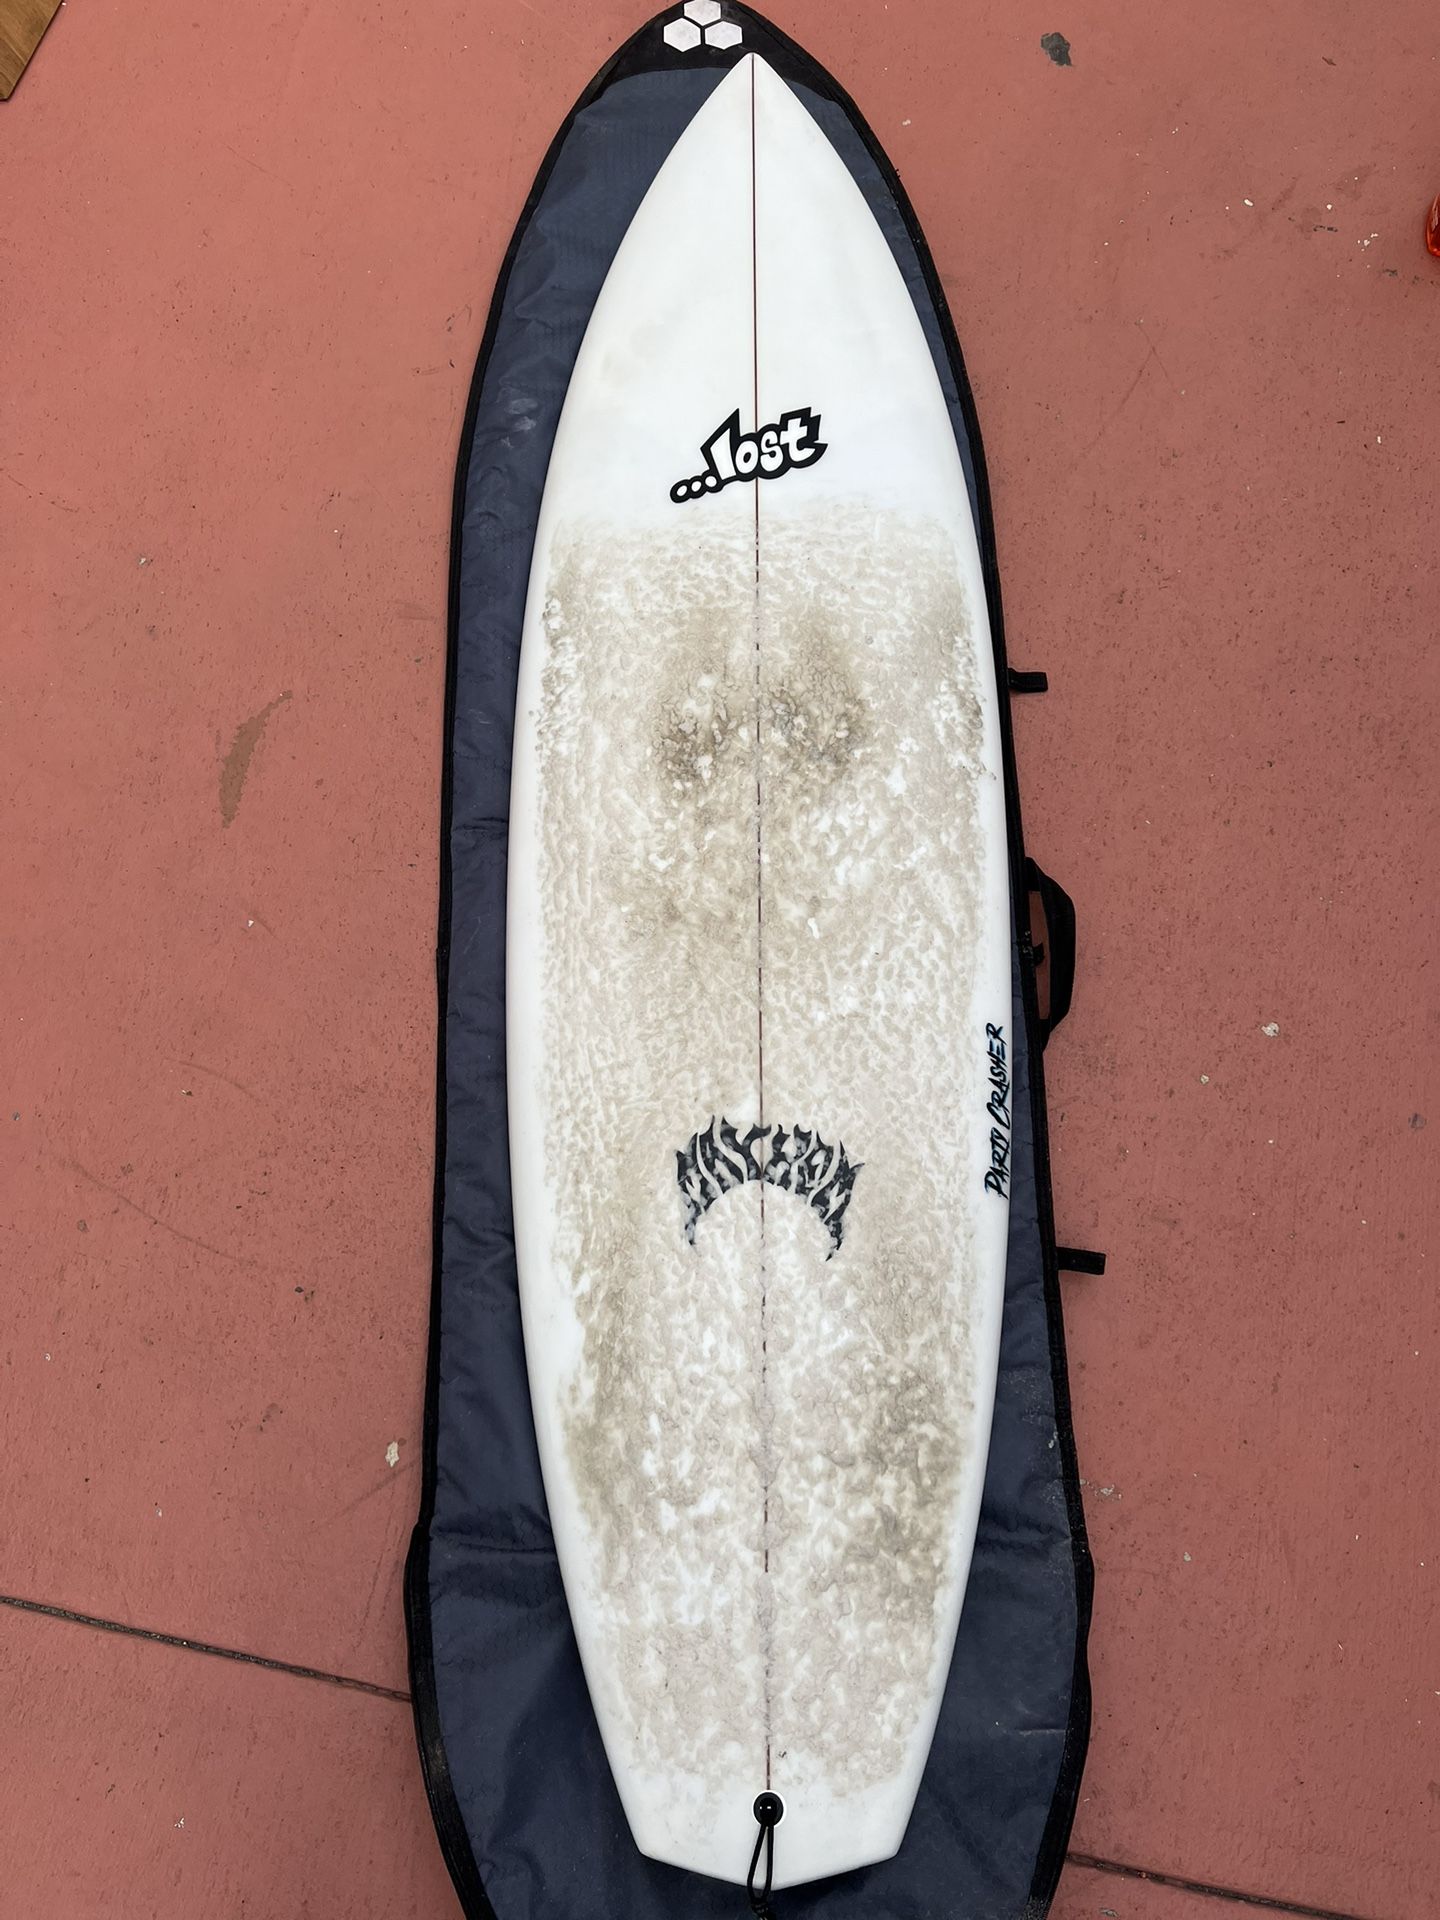 Lost Surfboard - 6’0” Party Crasher